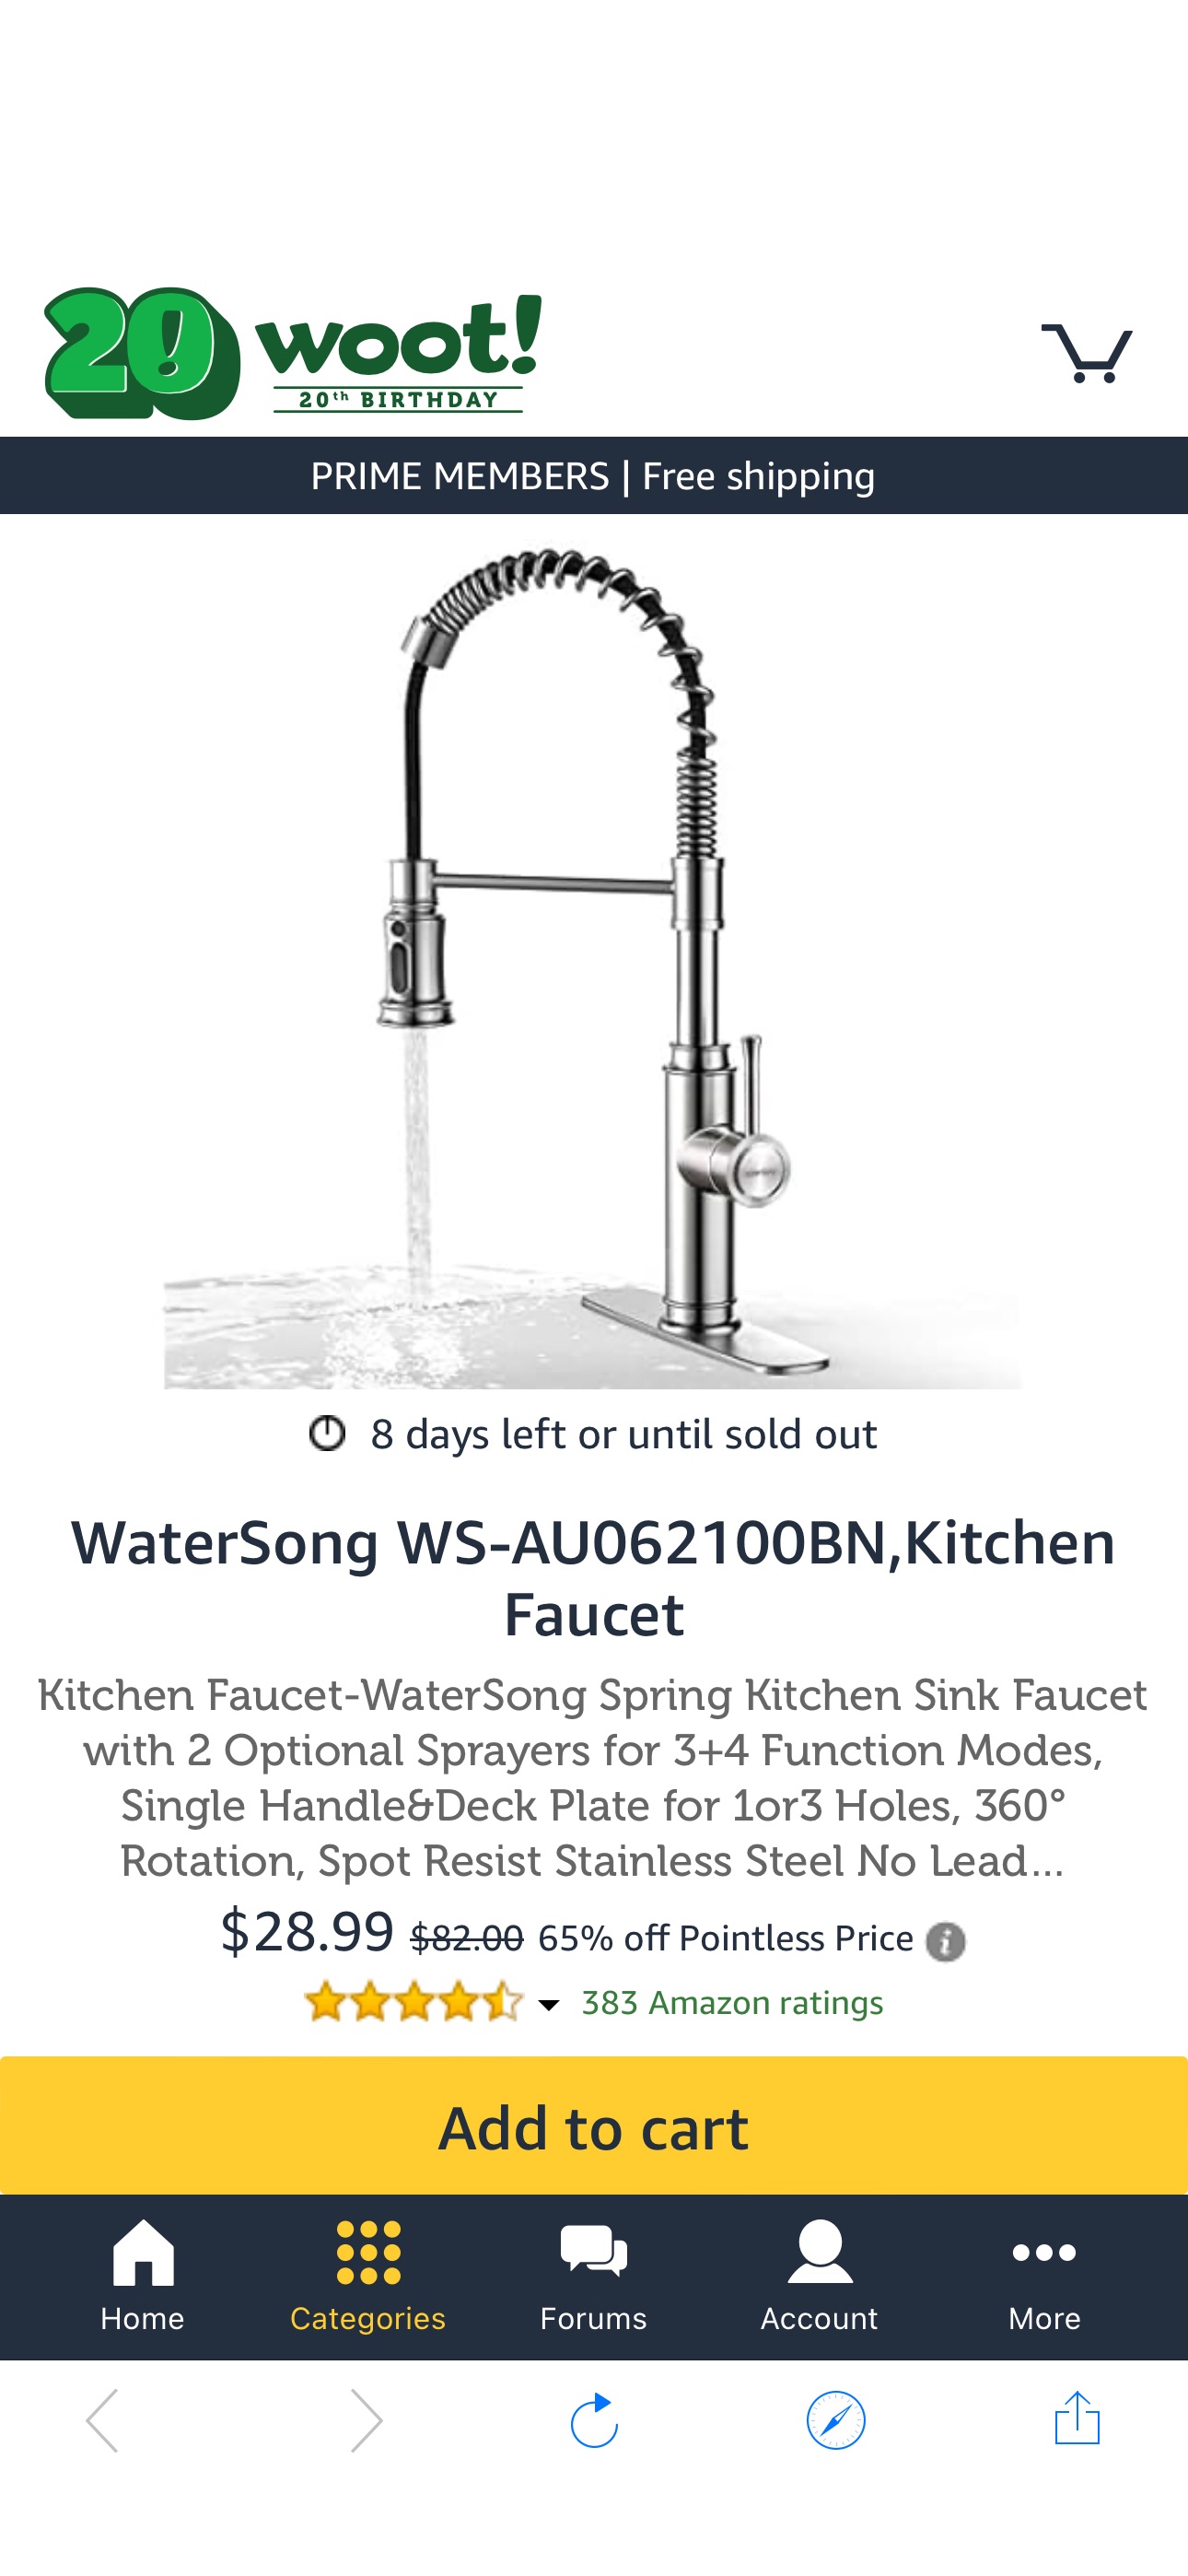 WaterSong WS-AU062100BN,Kitchen Faucet